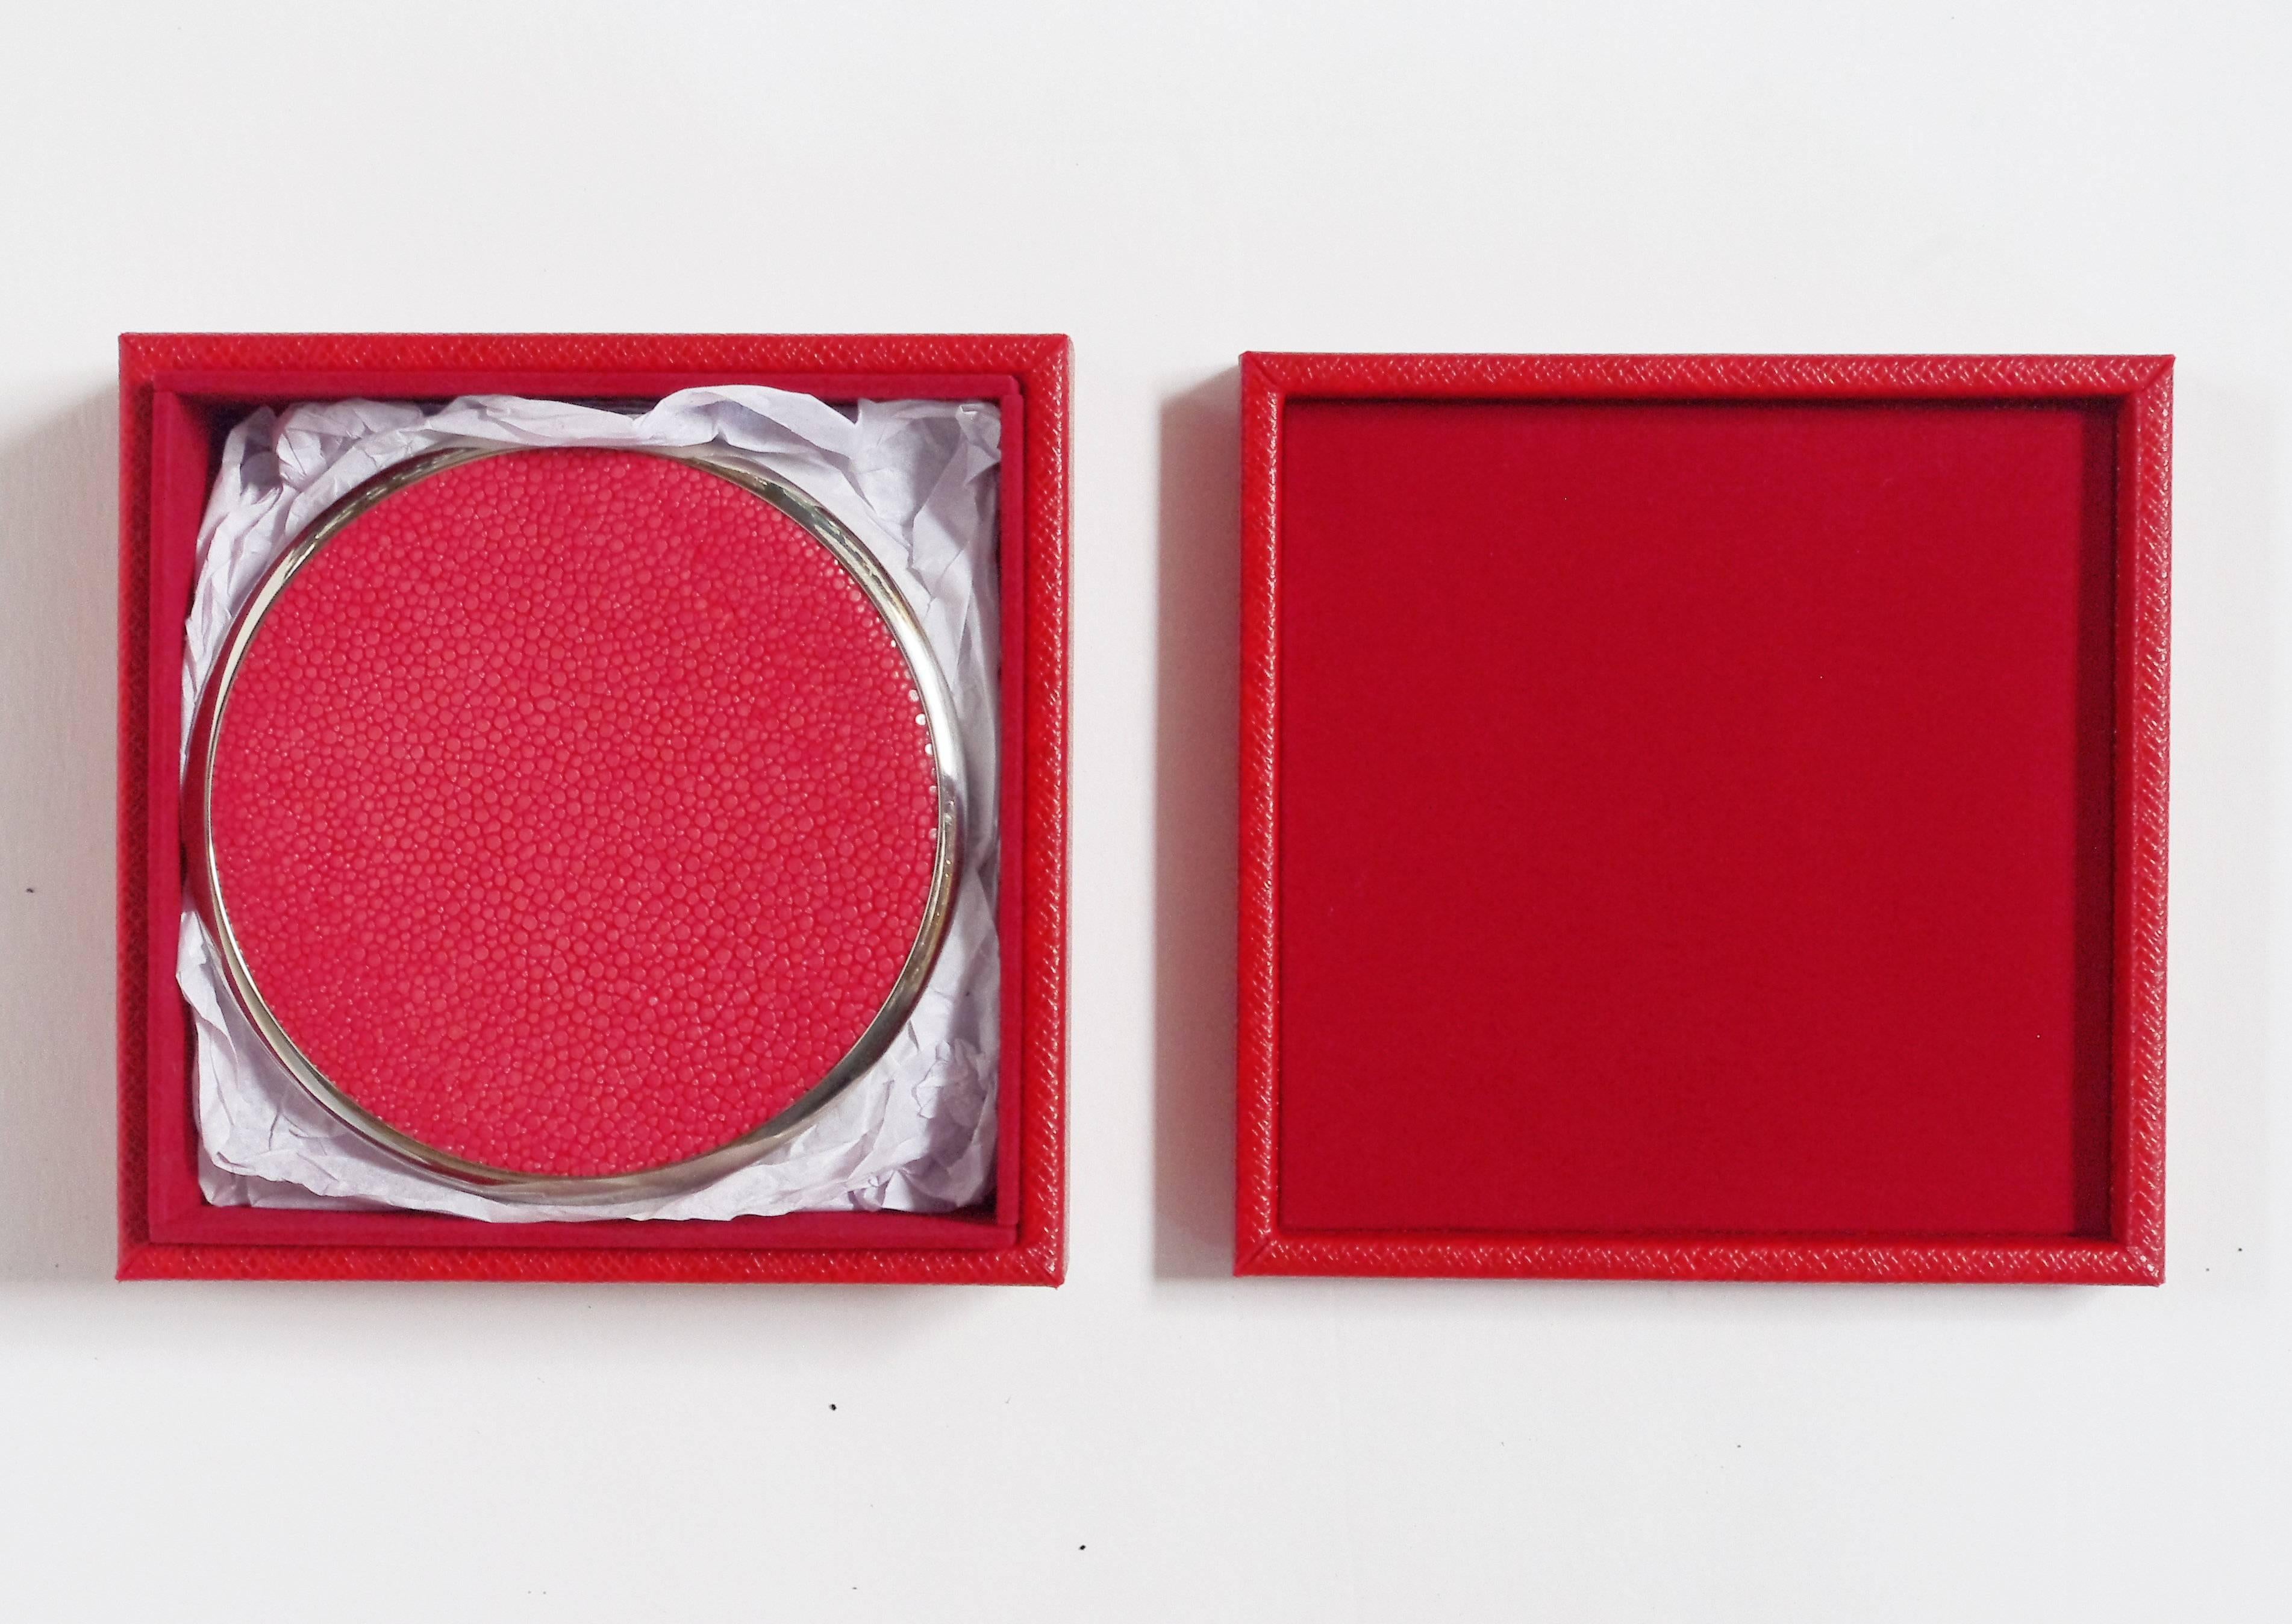 Italian red shagreen and nickel-plated coasters with matching red leather box designed by Fabio Bergomi for Fabio Ltd / Made in Italy
Coaster Diameter: 4.5 inches / Box Depth: 5.5 inches / Box Width: 5.5 inches / Box Height: 2.5 inches
3 sets in